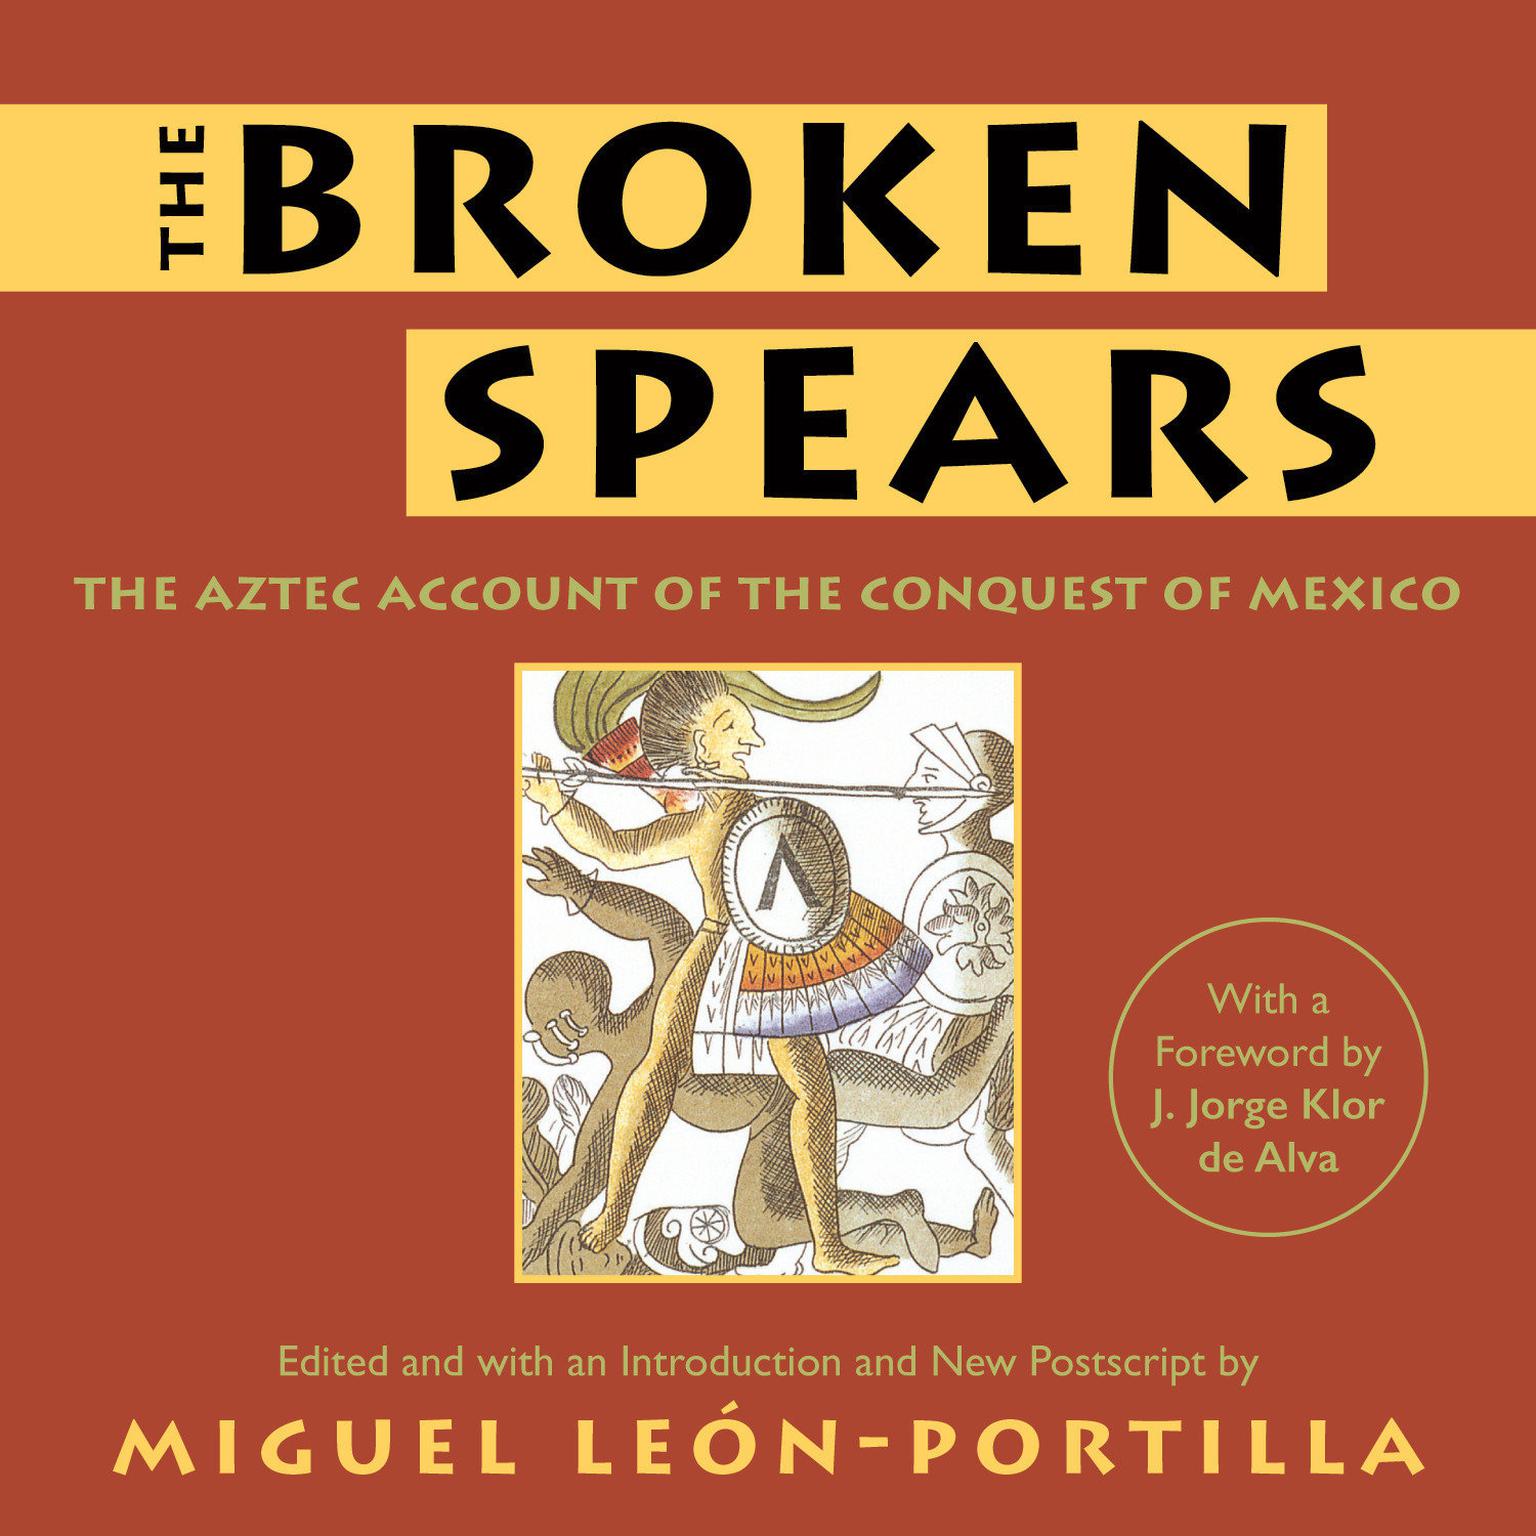 The Broken Spears 2007 Revised Edition: The Aztec Account of the Conquest of Mexico Audiobook, by Miguel Leon-Portilla